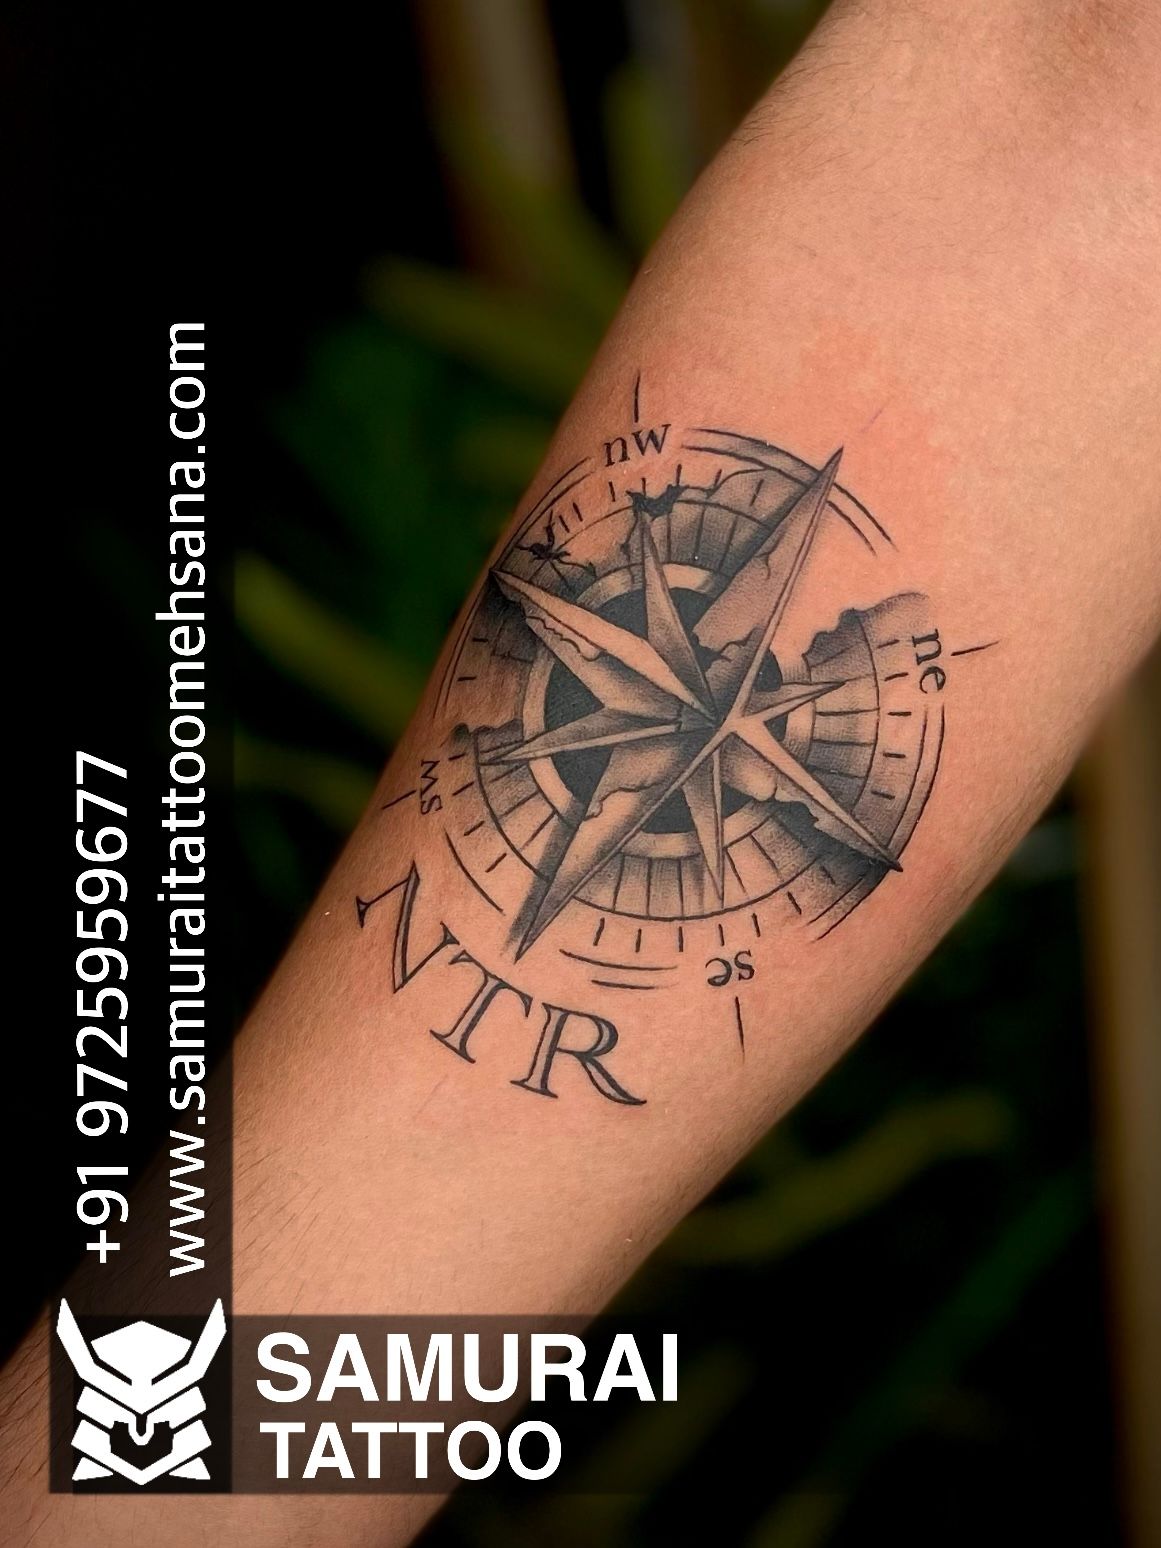 Lizard's Skin Tattoos - Compass tattoos are another very popular tattoo as  it has a deep meaning for many, it symbolizes finding one's way or  direction in life, Many people would walk